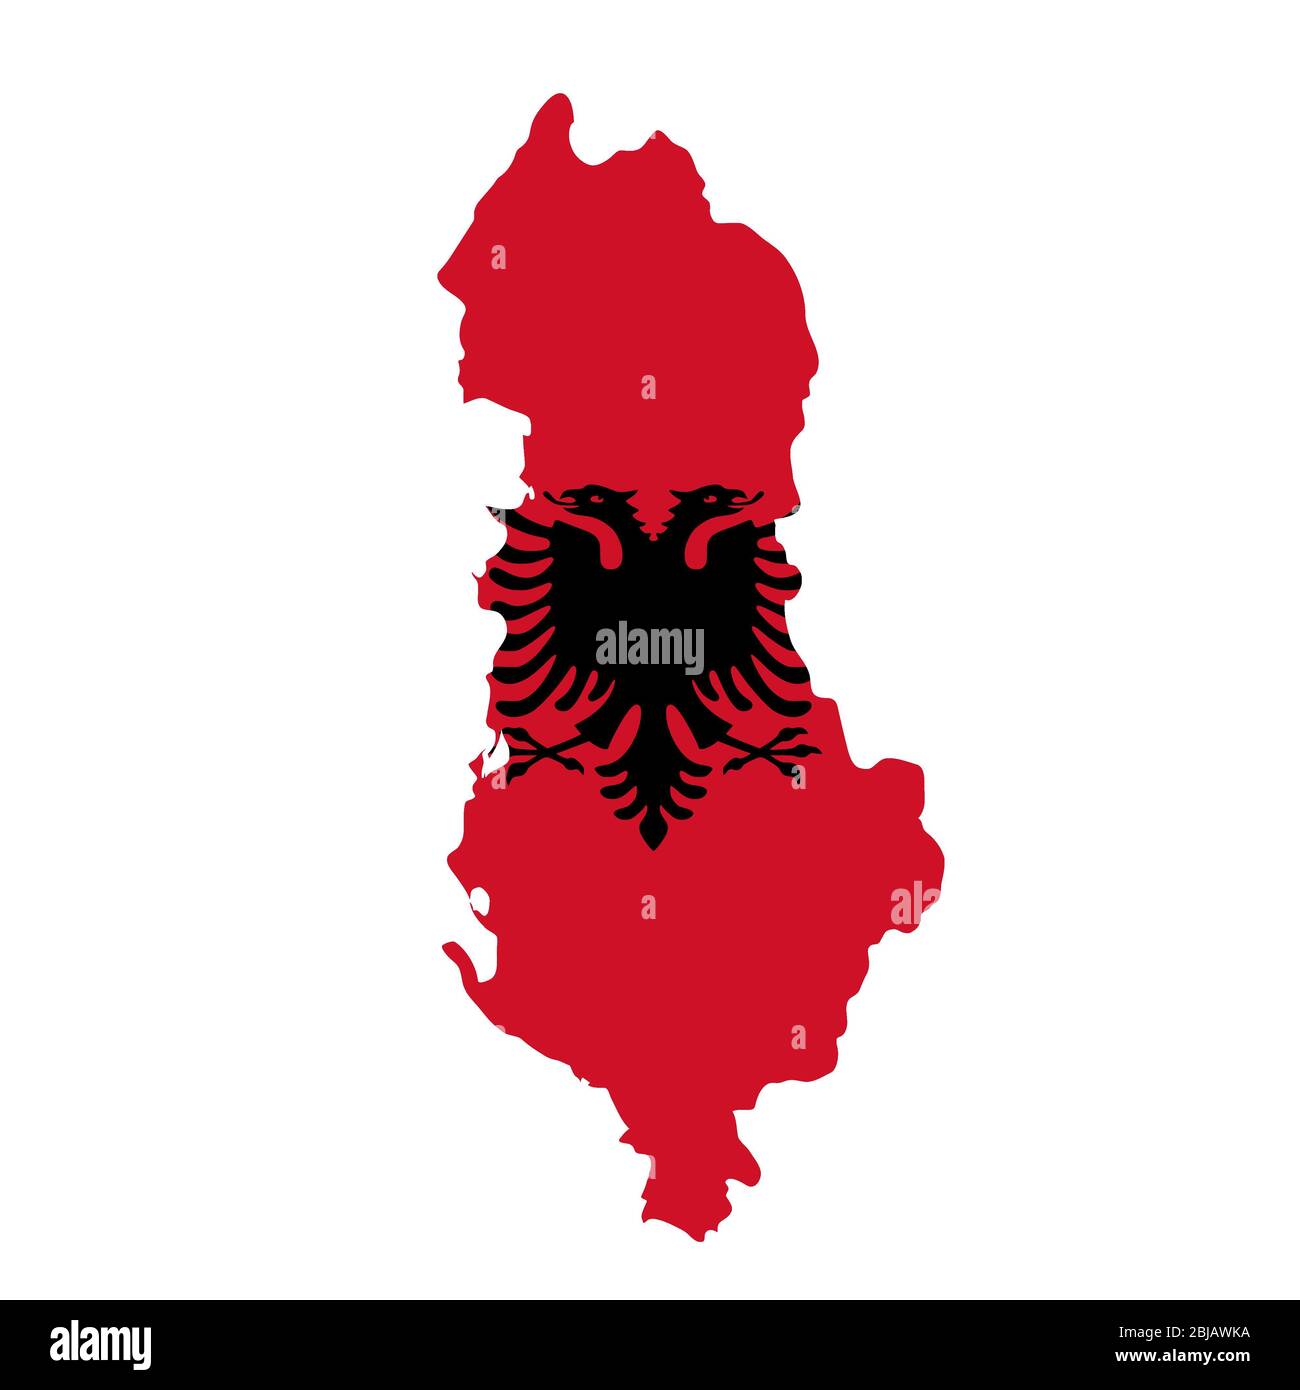 Albania flag map. Country outline with national flag Stock Photo - Alamy